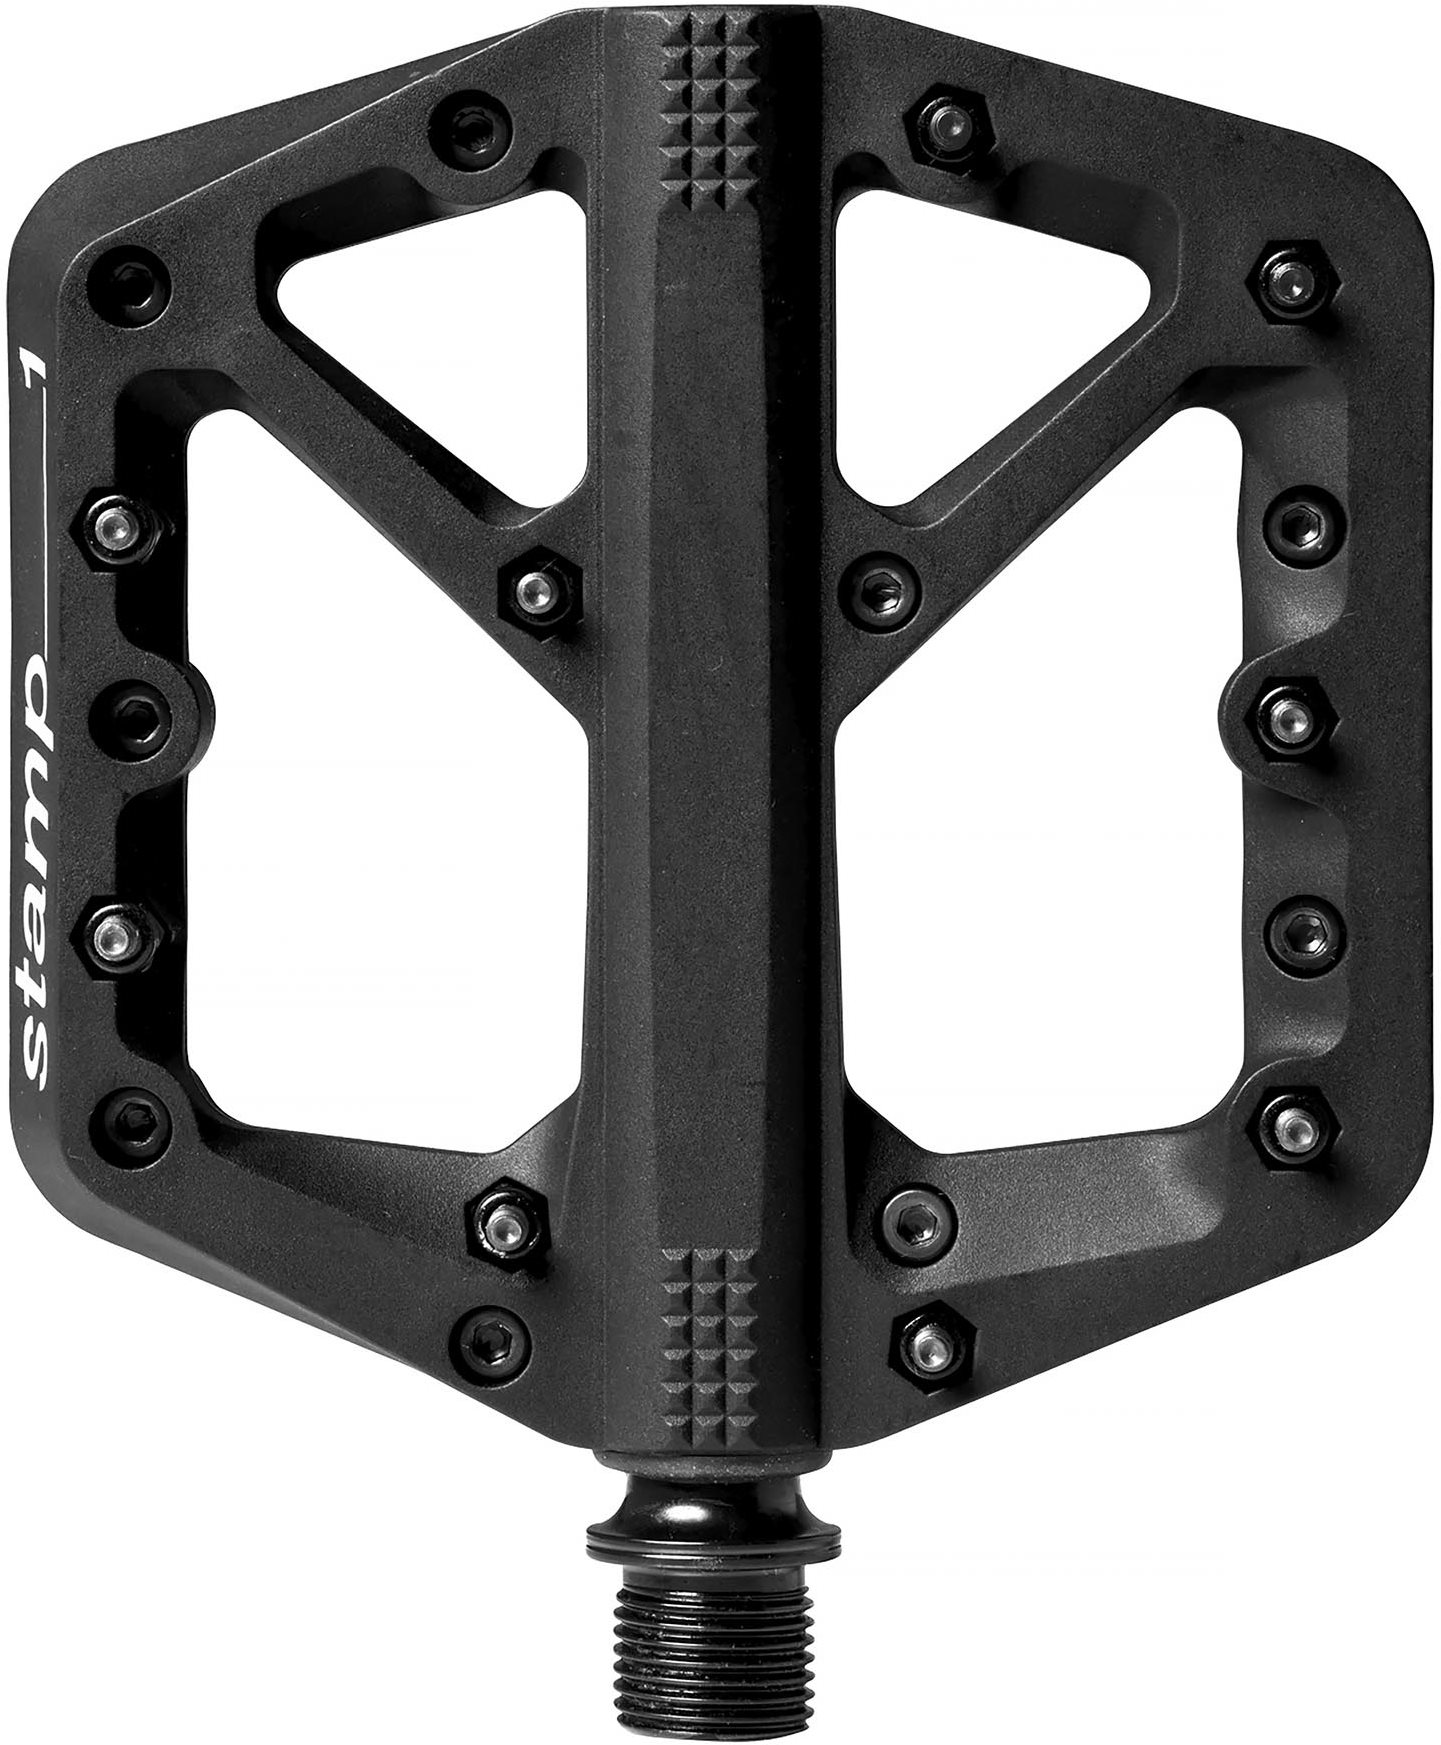 Pedál Crankbrothers Stamp 1 Small Black